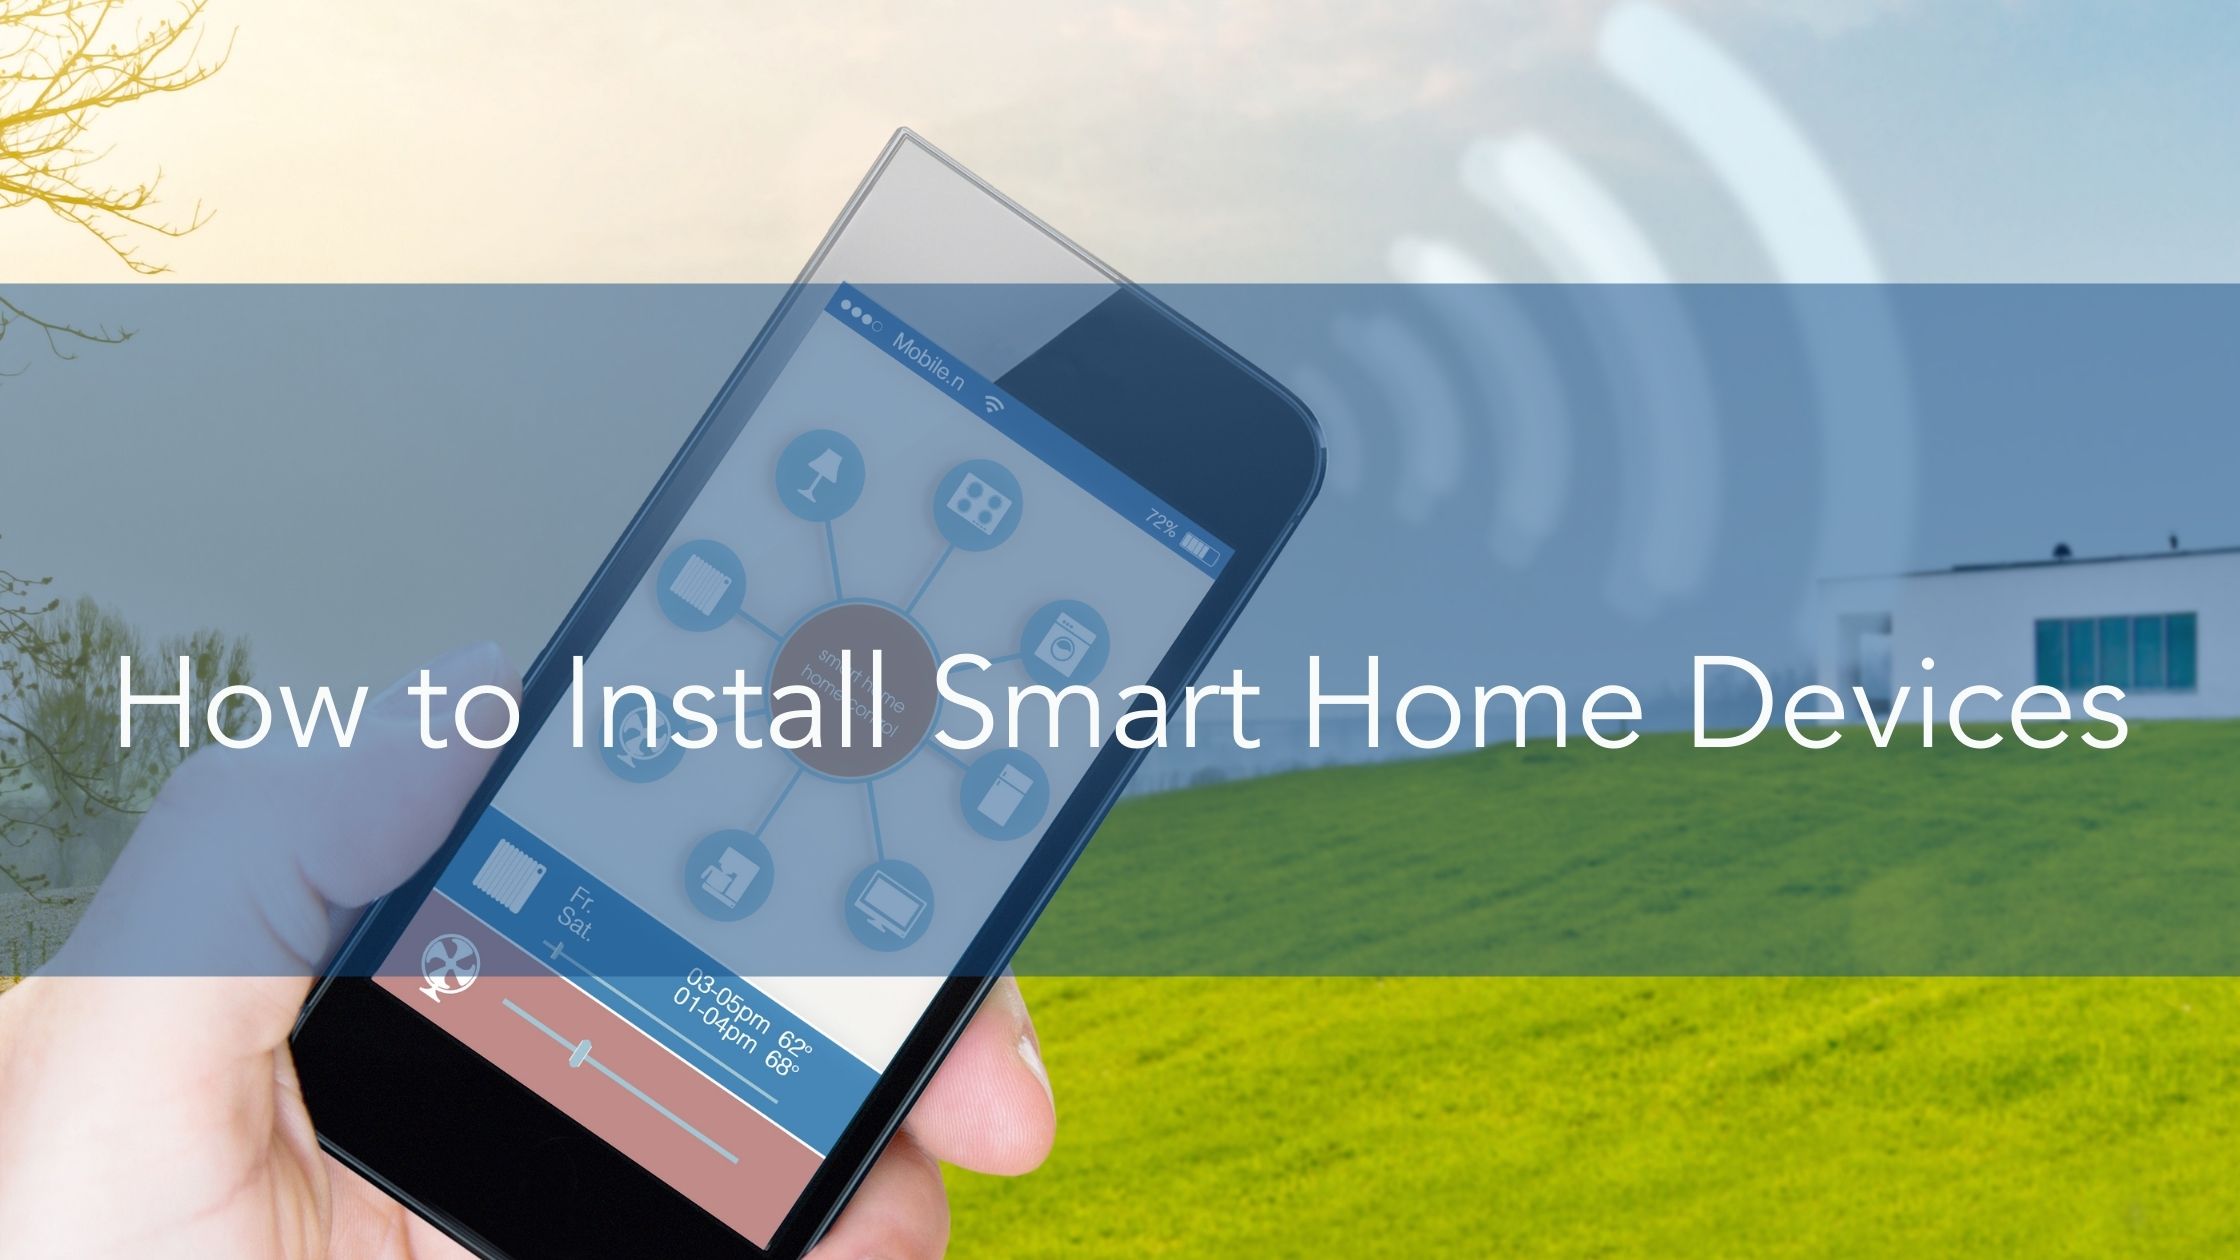 //www.explorizers.com/wp-content/uploads/2021/11/How-to-Install-Smart-Home-Devices.jpg